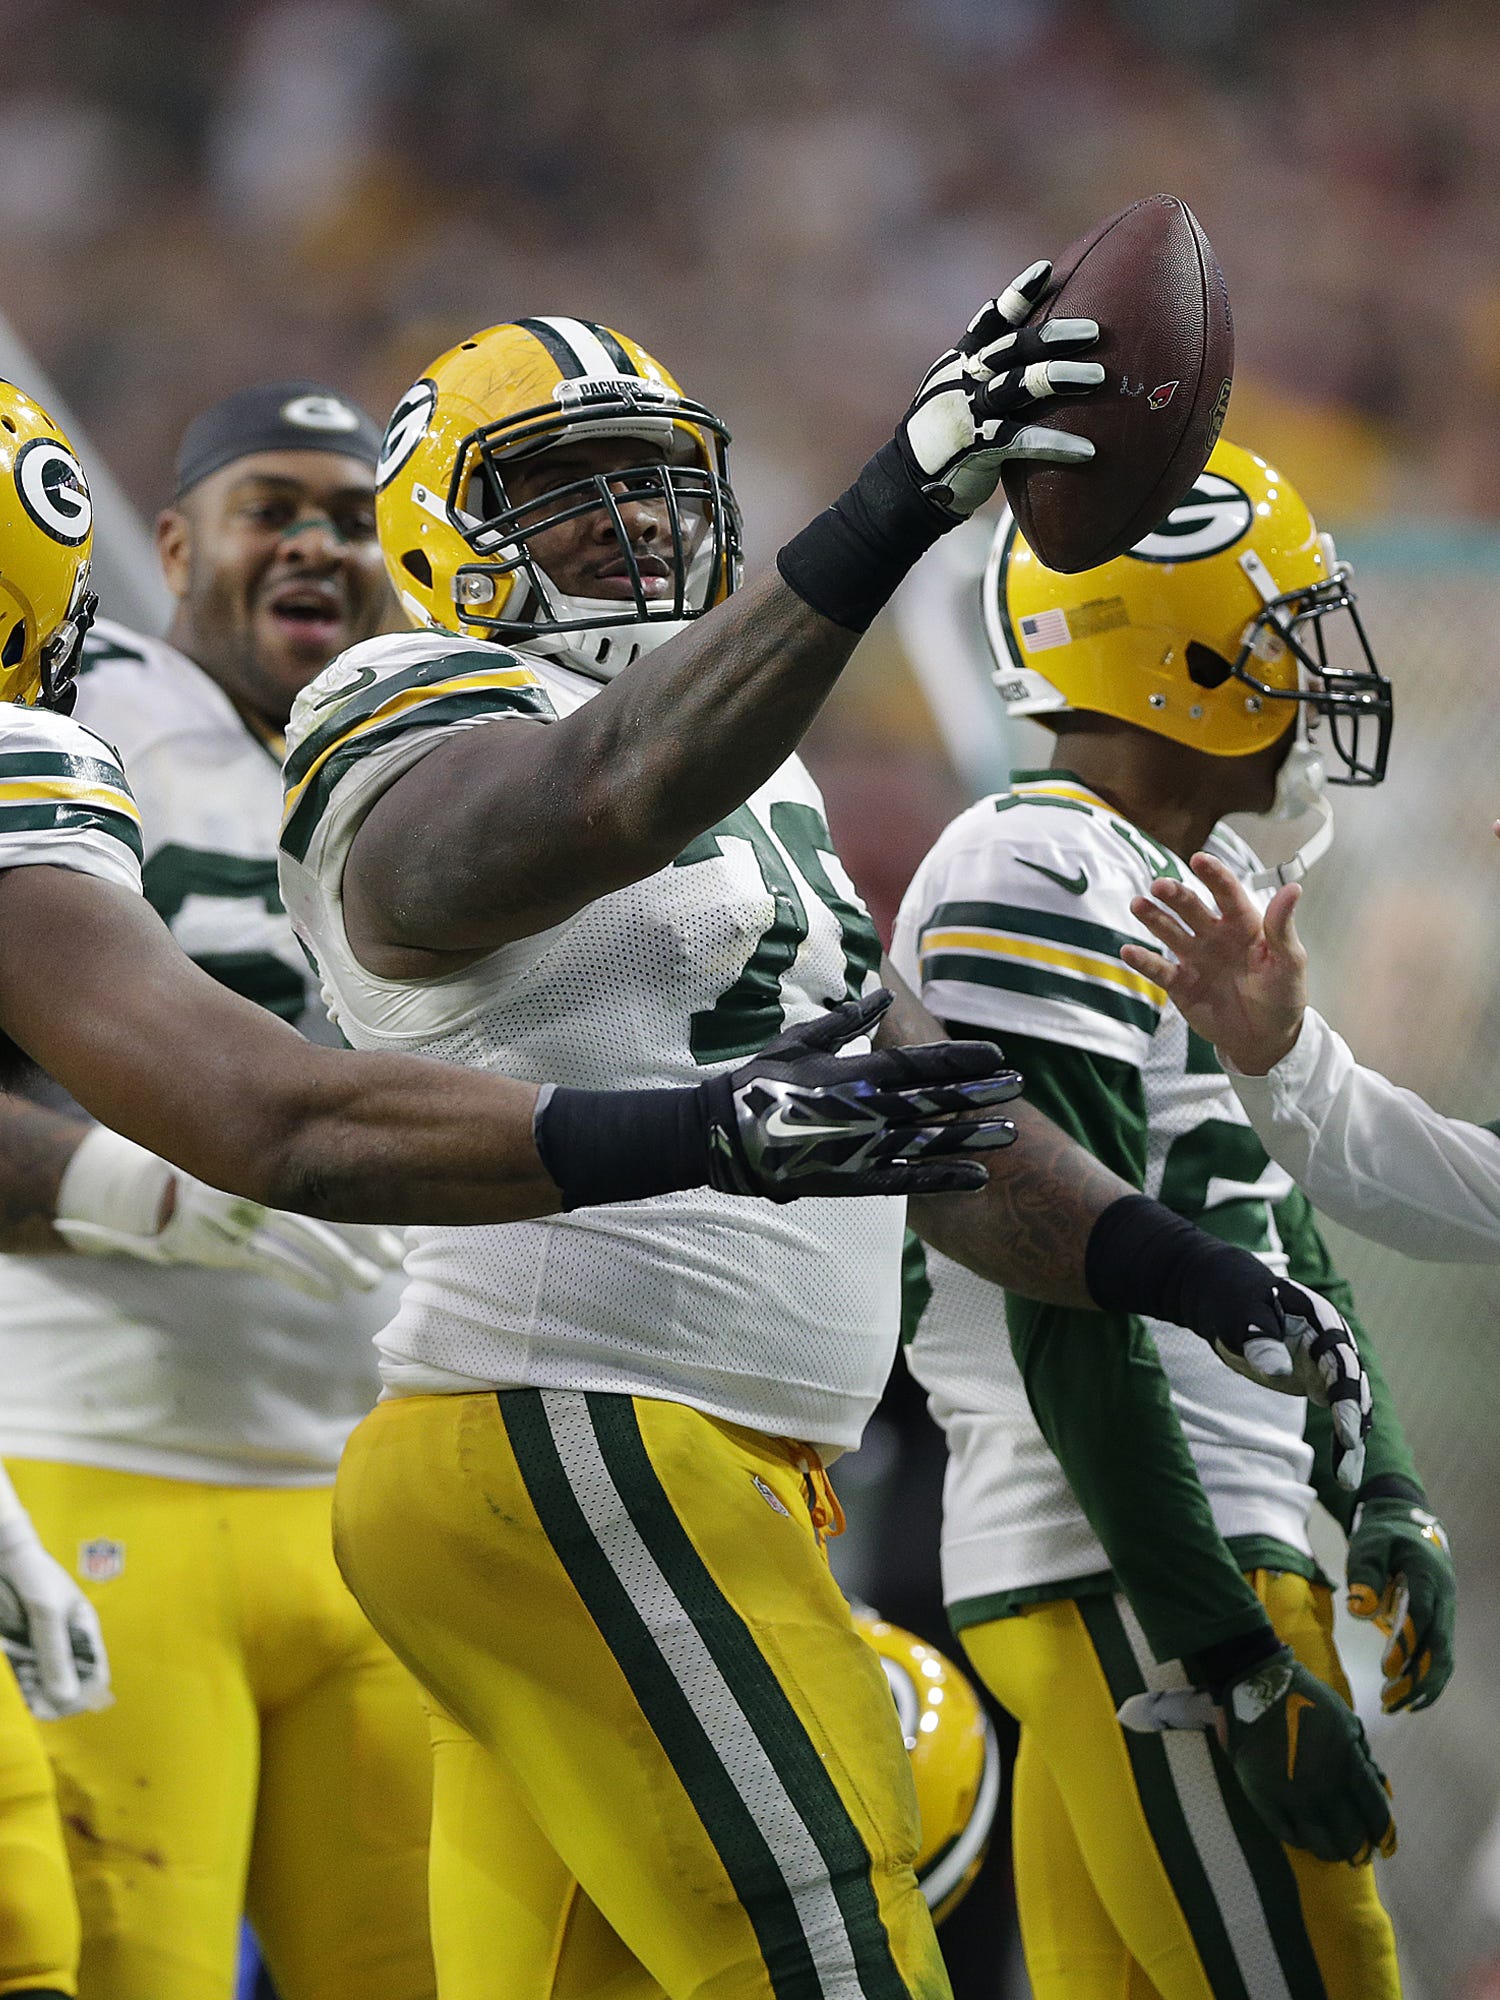 Green Bay Packers defensive tackle Mike Daniels (76) reacts after making an interception against the Arizona Cardinals on Dec. 27, 2015, at University of Phoenix Stadium in Glendale, Ariz.